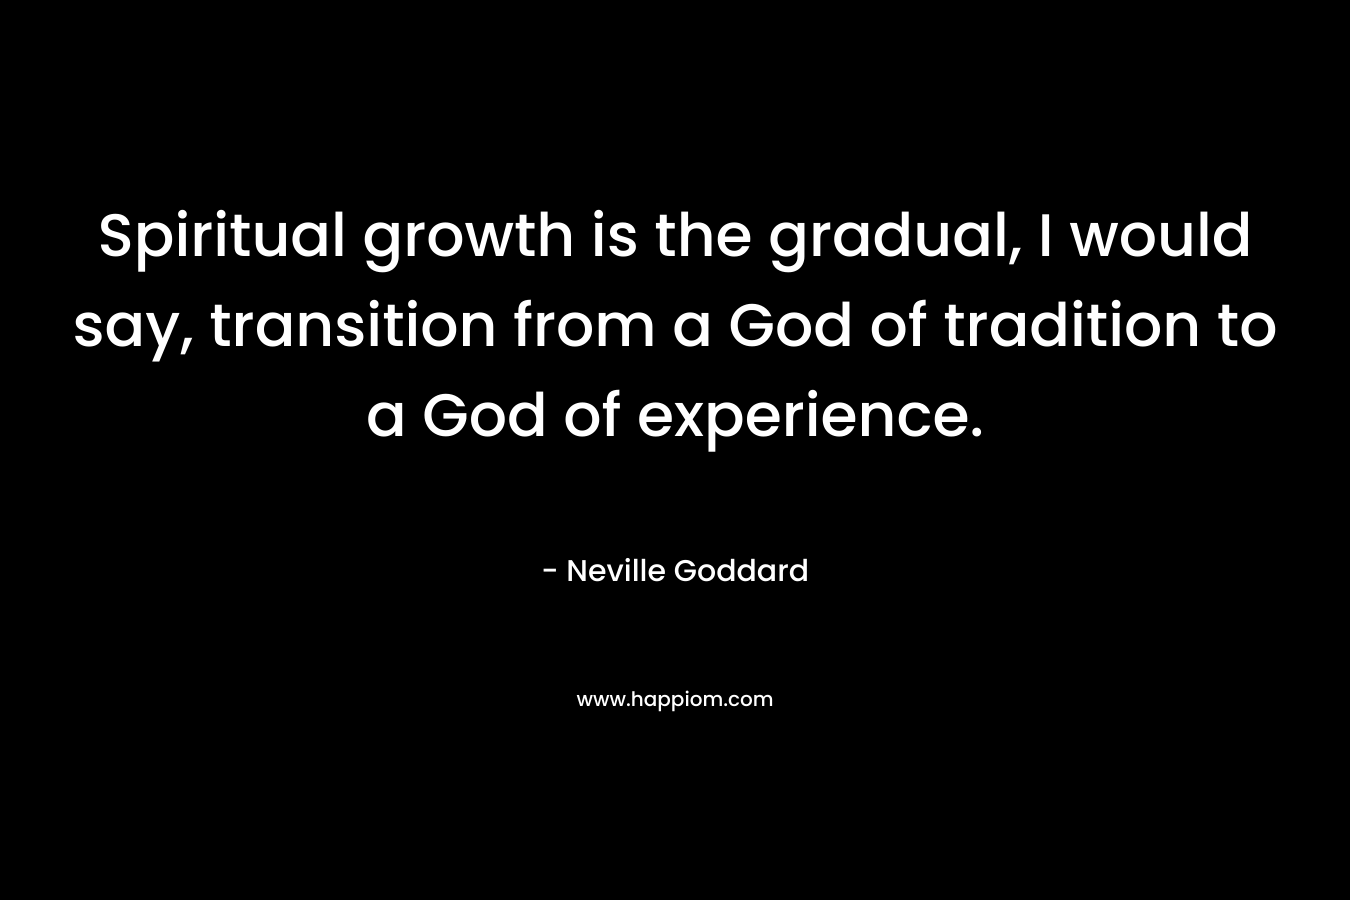 Spiritual growth is the gradual, I would say, transition from a God of tradition to a God of experience. – Neville Goddard